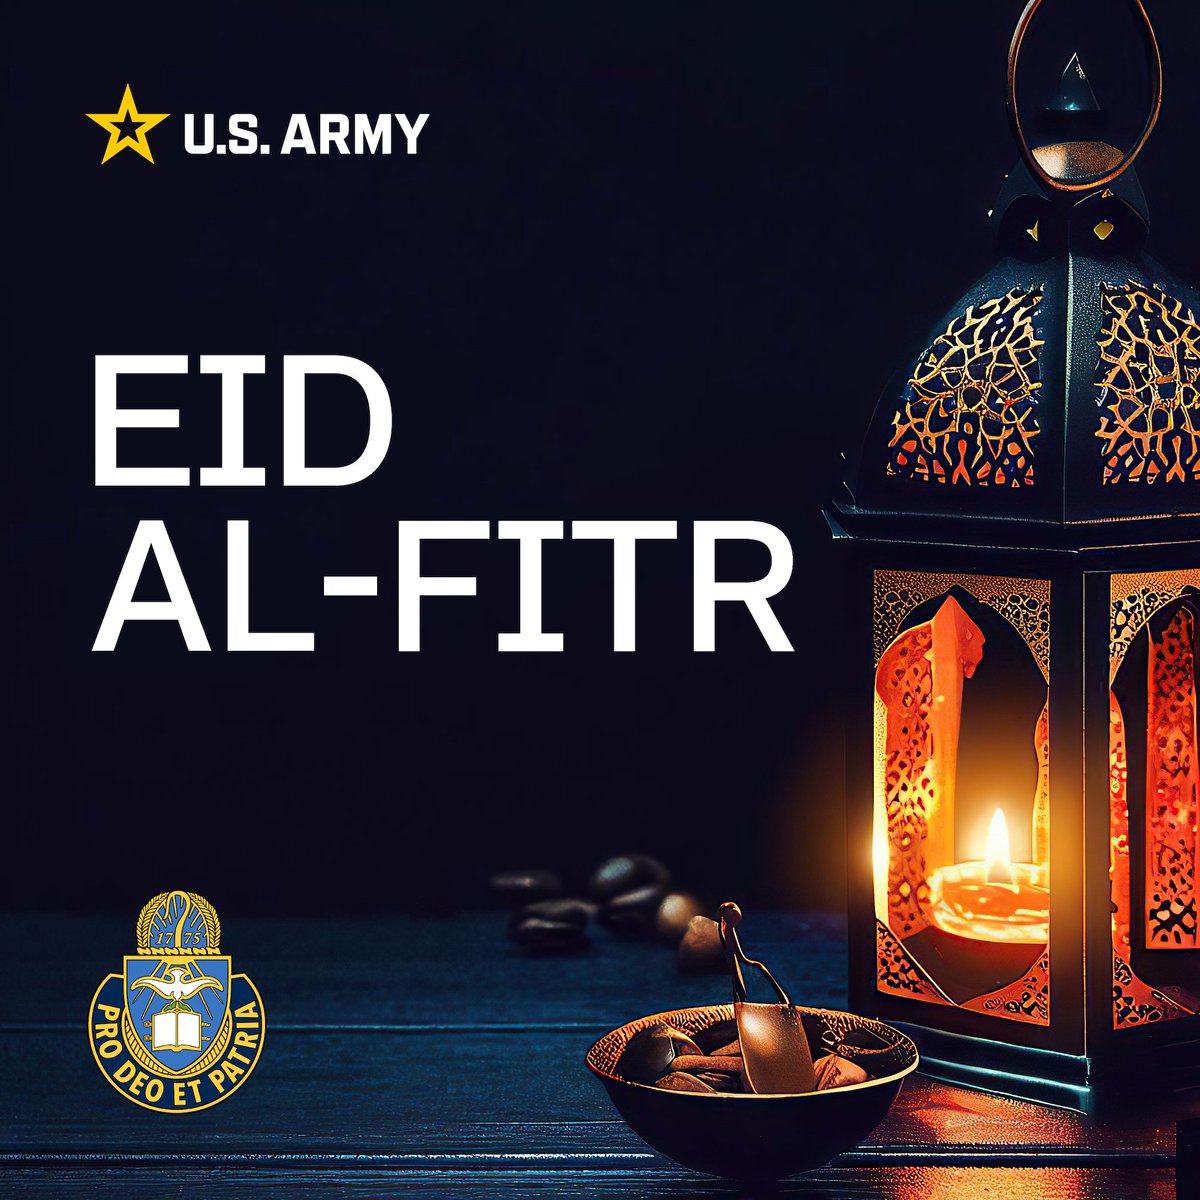 Blessings on our Muslim Chaplains, Soldiers, and their Families on this special holiday. Eid al-Fitr marks the end of Ramadan, a month of fasting and spiritual reflection for Muslims worldwide. Eid Mubarak! #EidAlFitr | #EidMubarak | #ChaplainCorps